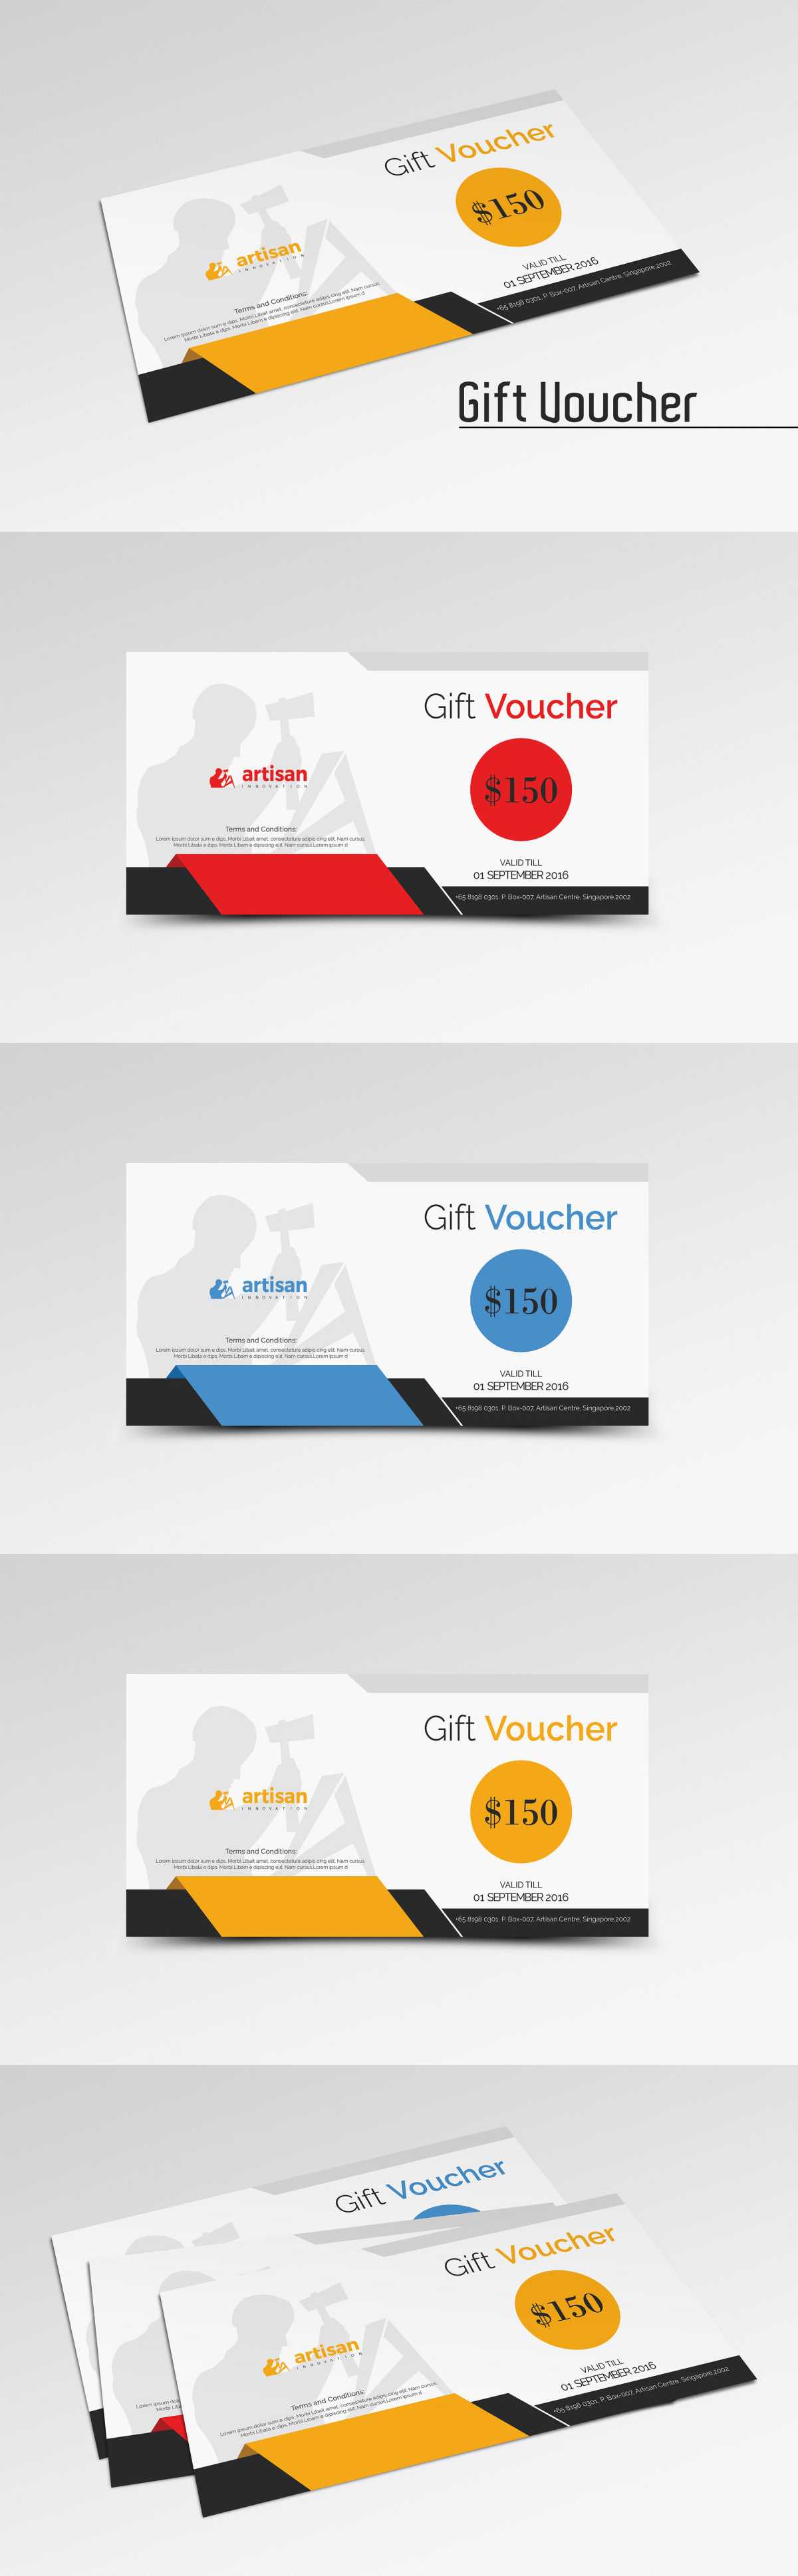 Gift Voucher Template Ai, Eps, Psd | Gift Voucher Templates Pertaining To Gift Card Template Illustrator